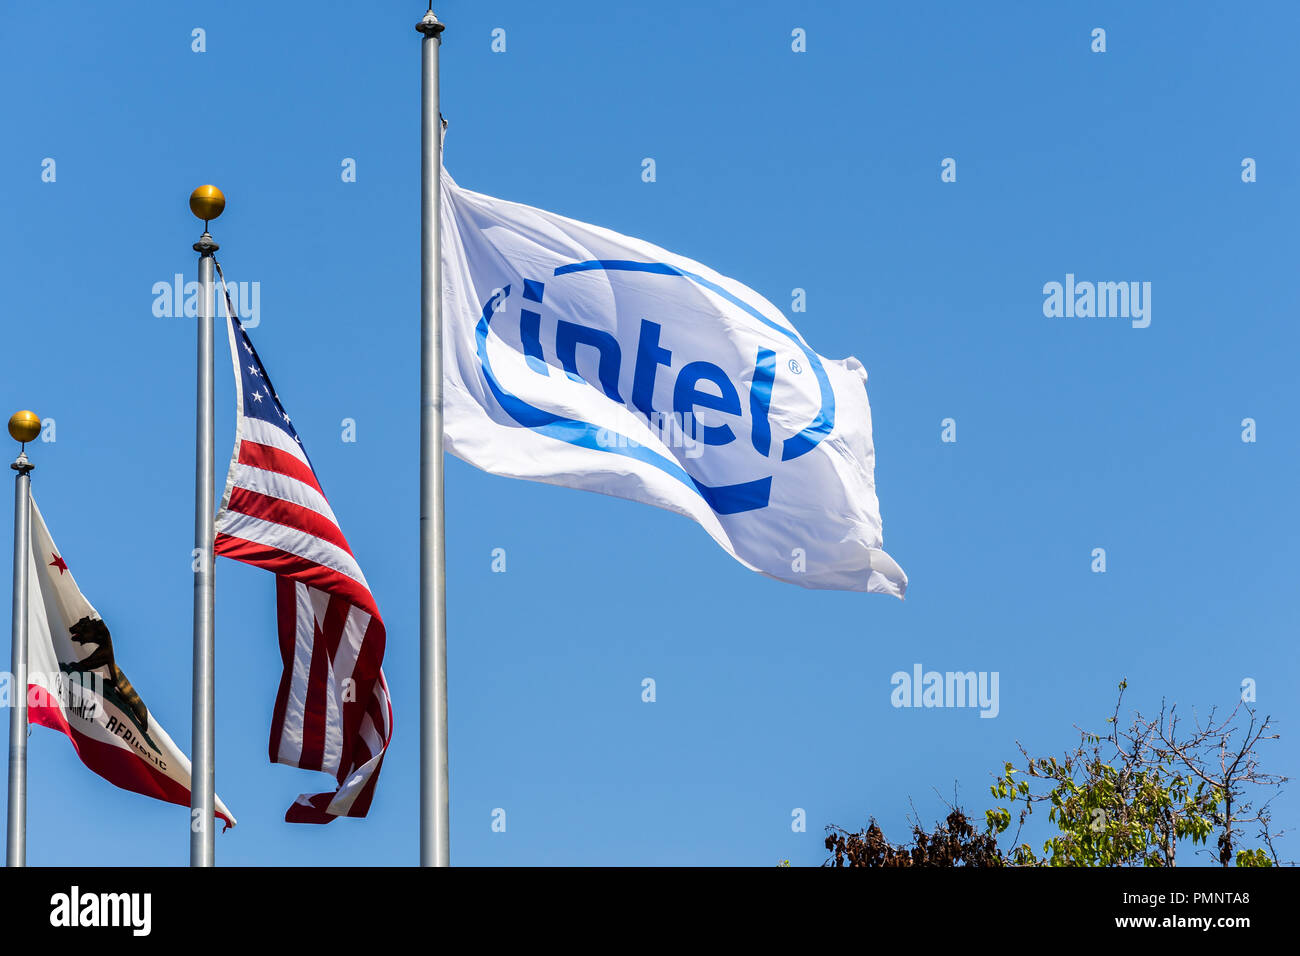 May 3, 2018 Santa Clara / CA / USA - Intel logo on a flag blowing in the wind; The California Republic and the US flag in the background Stock Photo